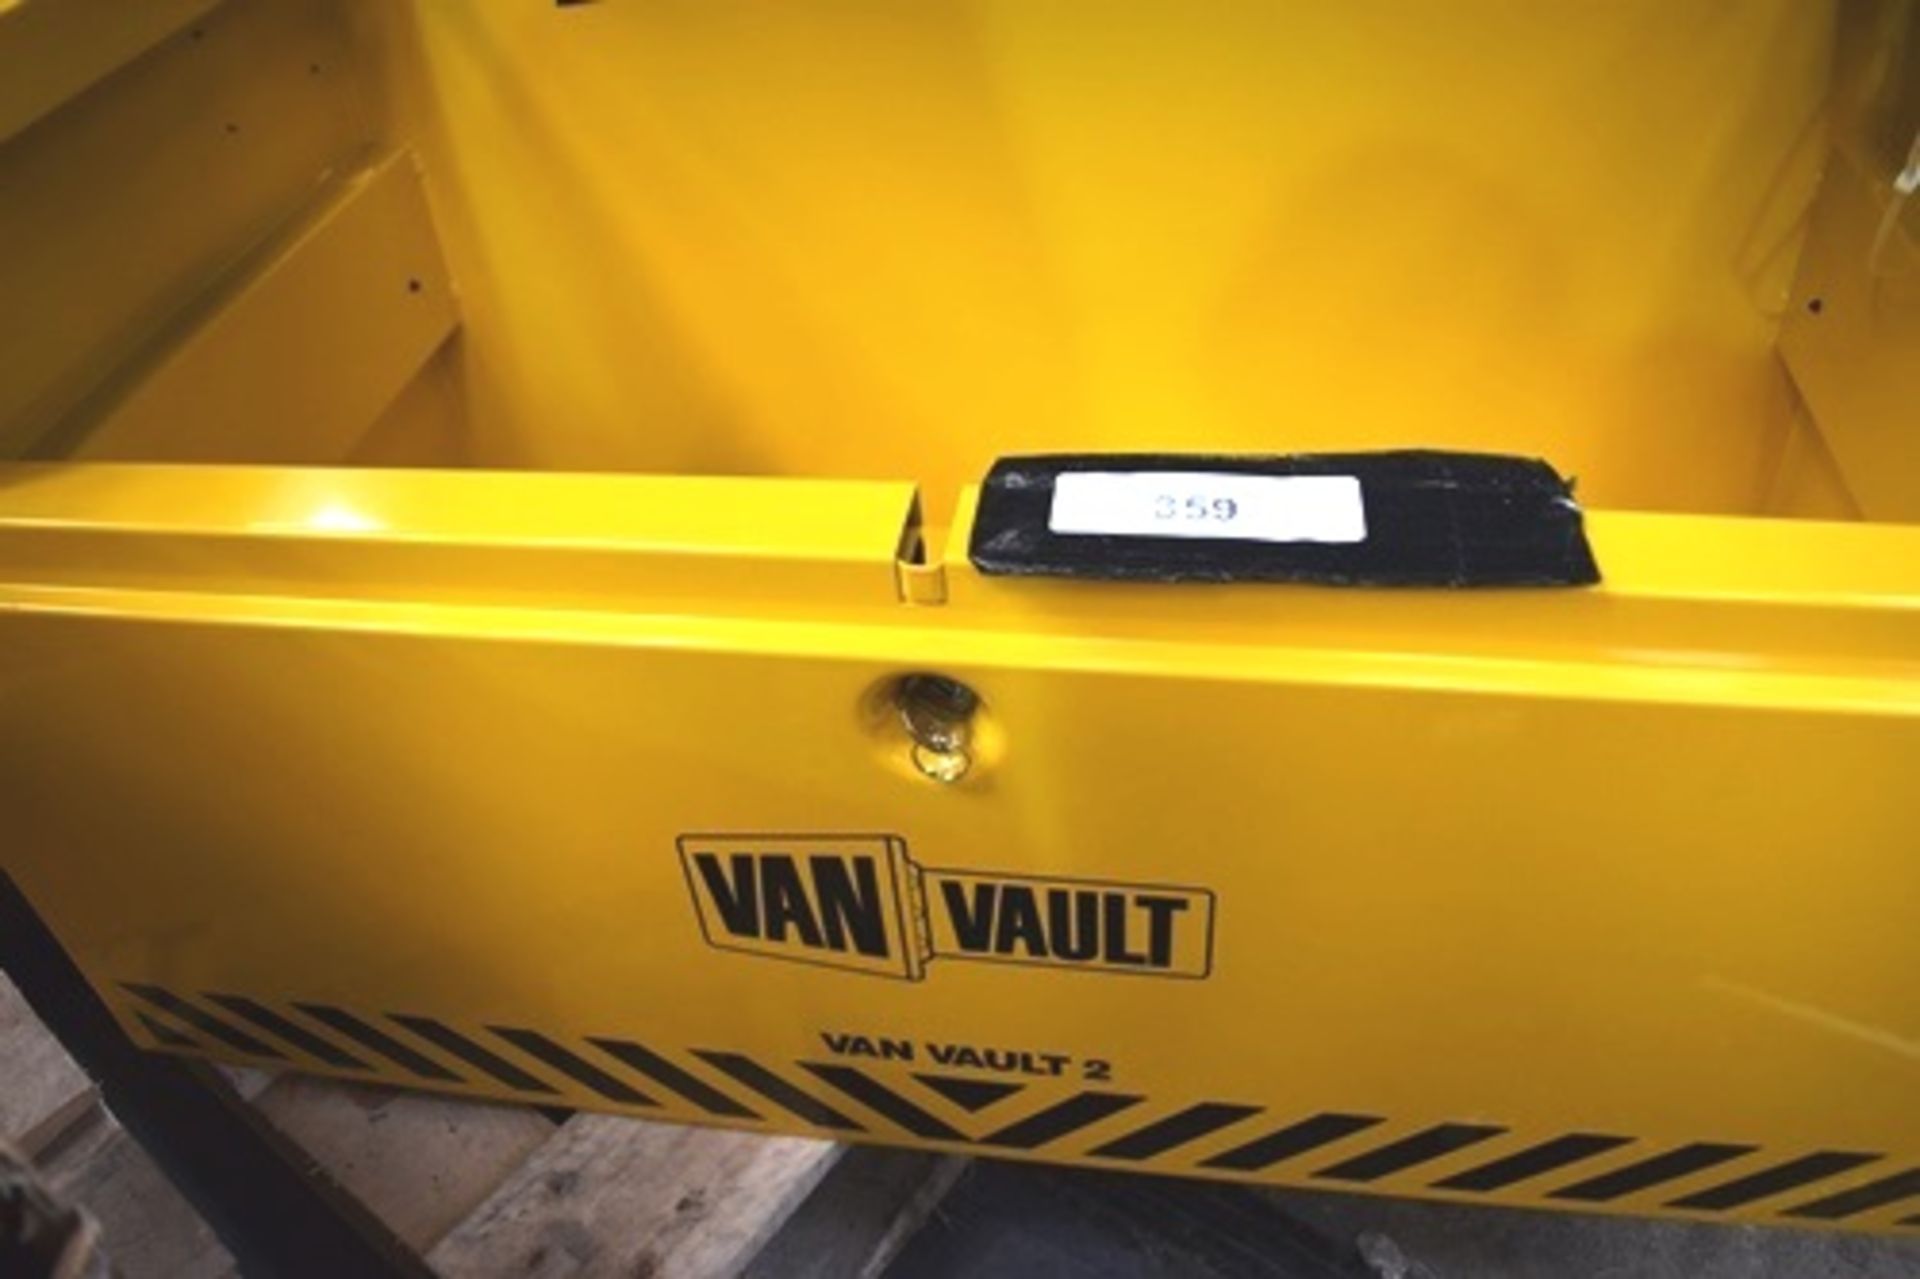 1 x Van Vault 2 secure storage box, with key and fittings, size 490 x 937 x 530mm - New with tags ( - Image 2 of 3